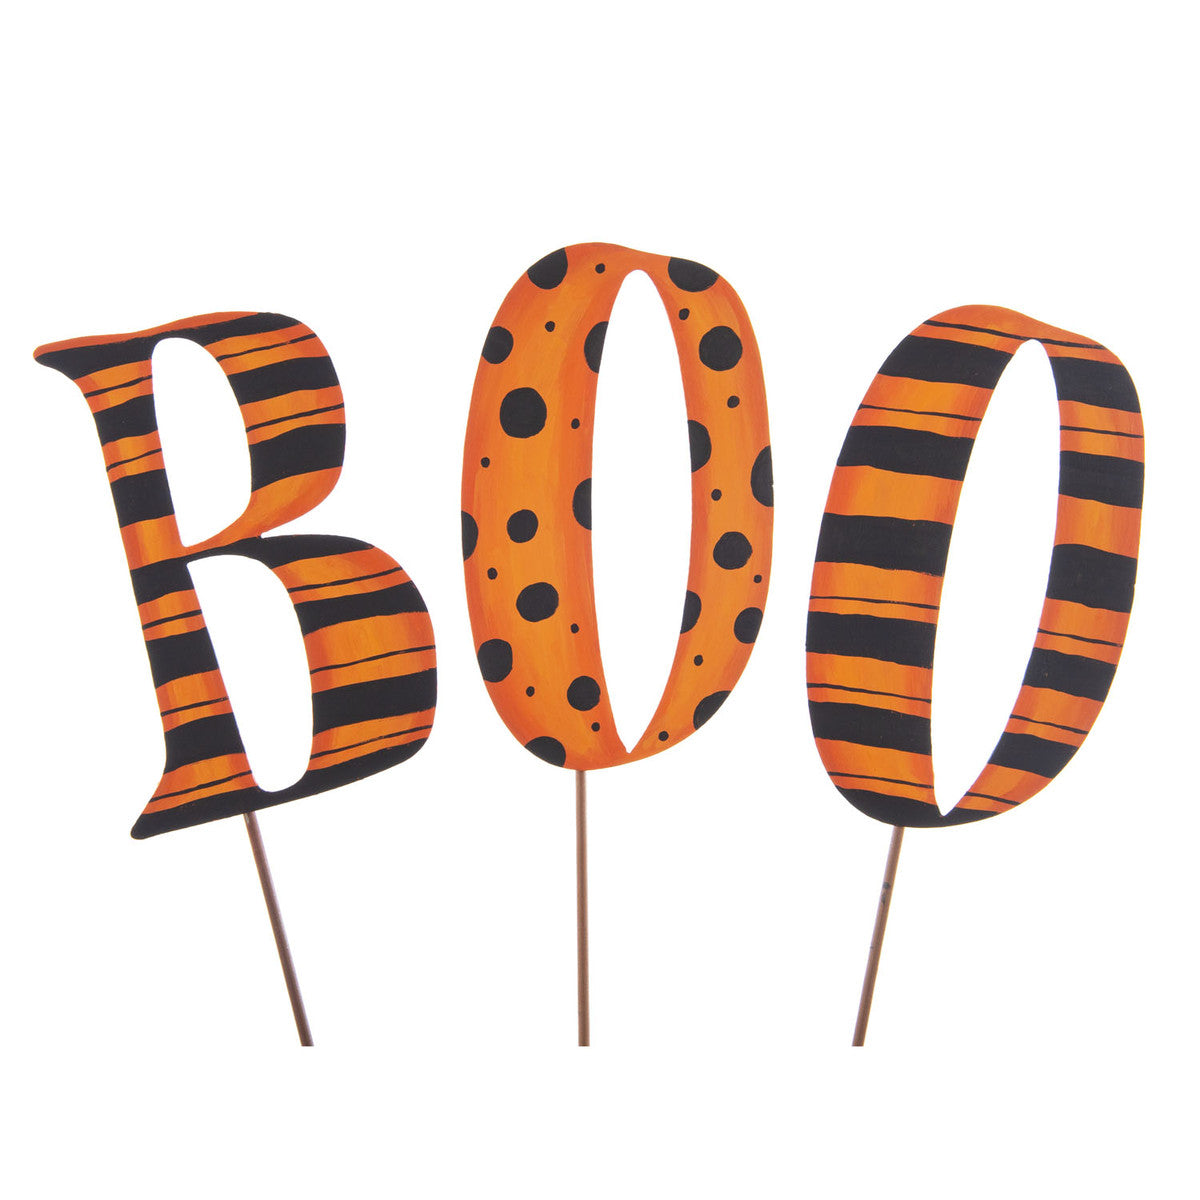 Patterned "BOO" Stakes Set